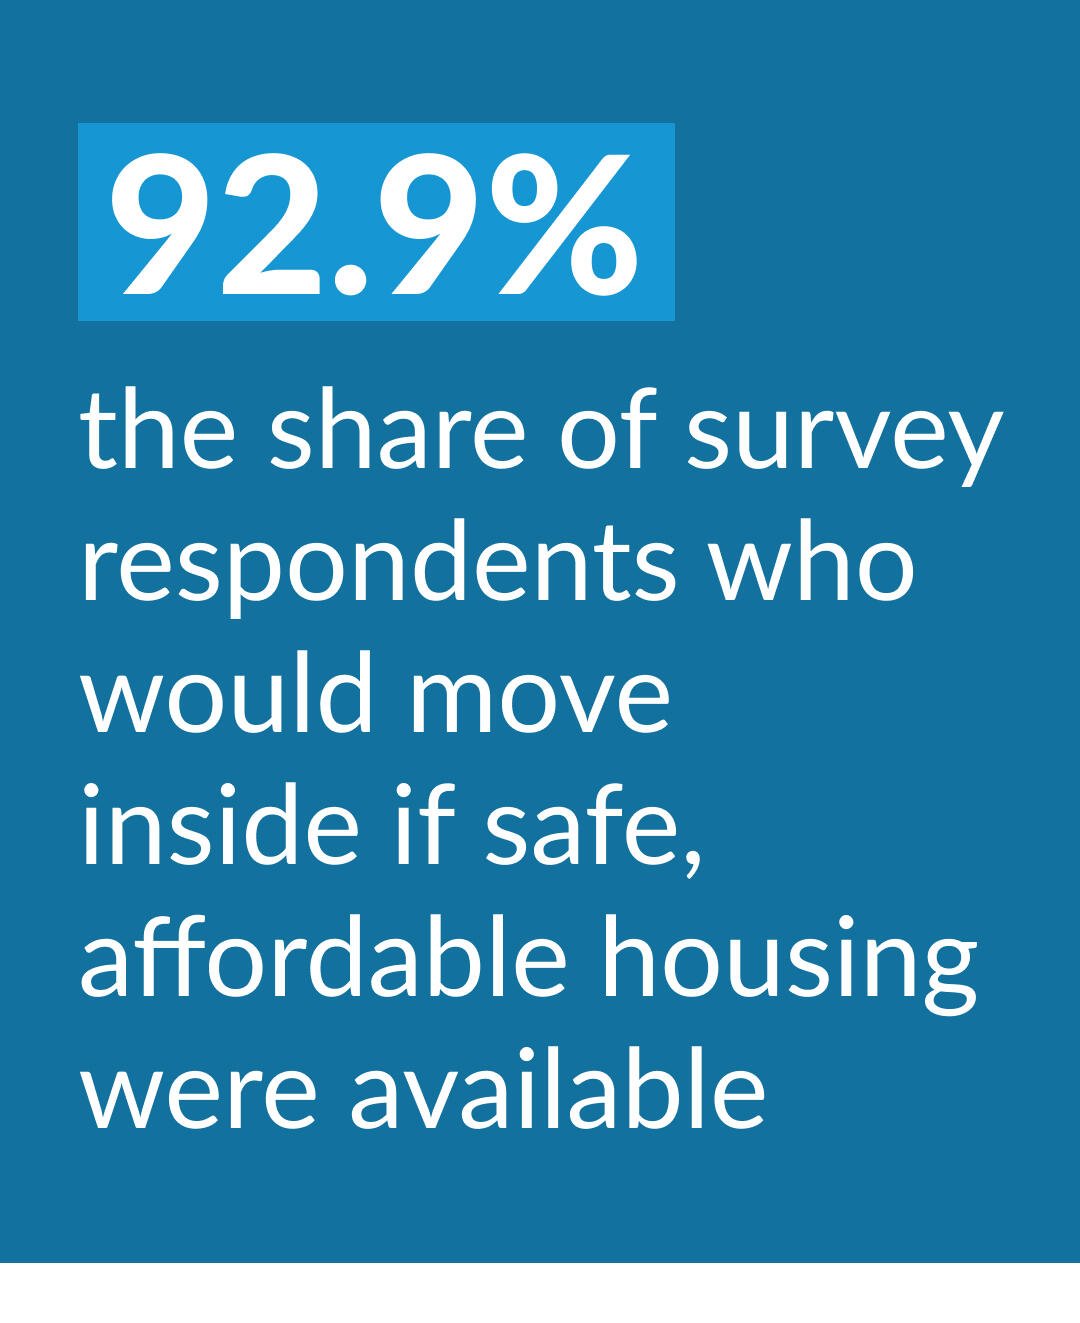 92.9% of the share of survey respondents who would move inside if safe, afforable housing were available.